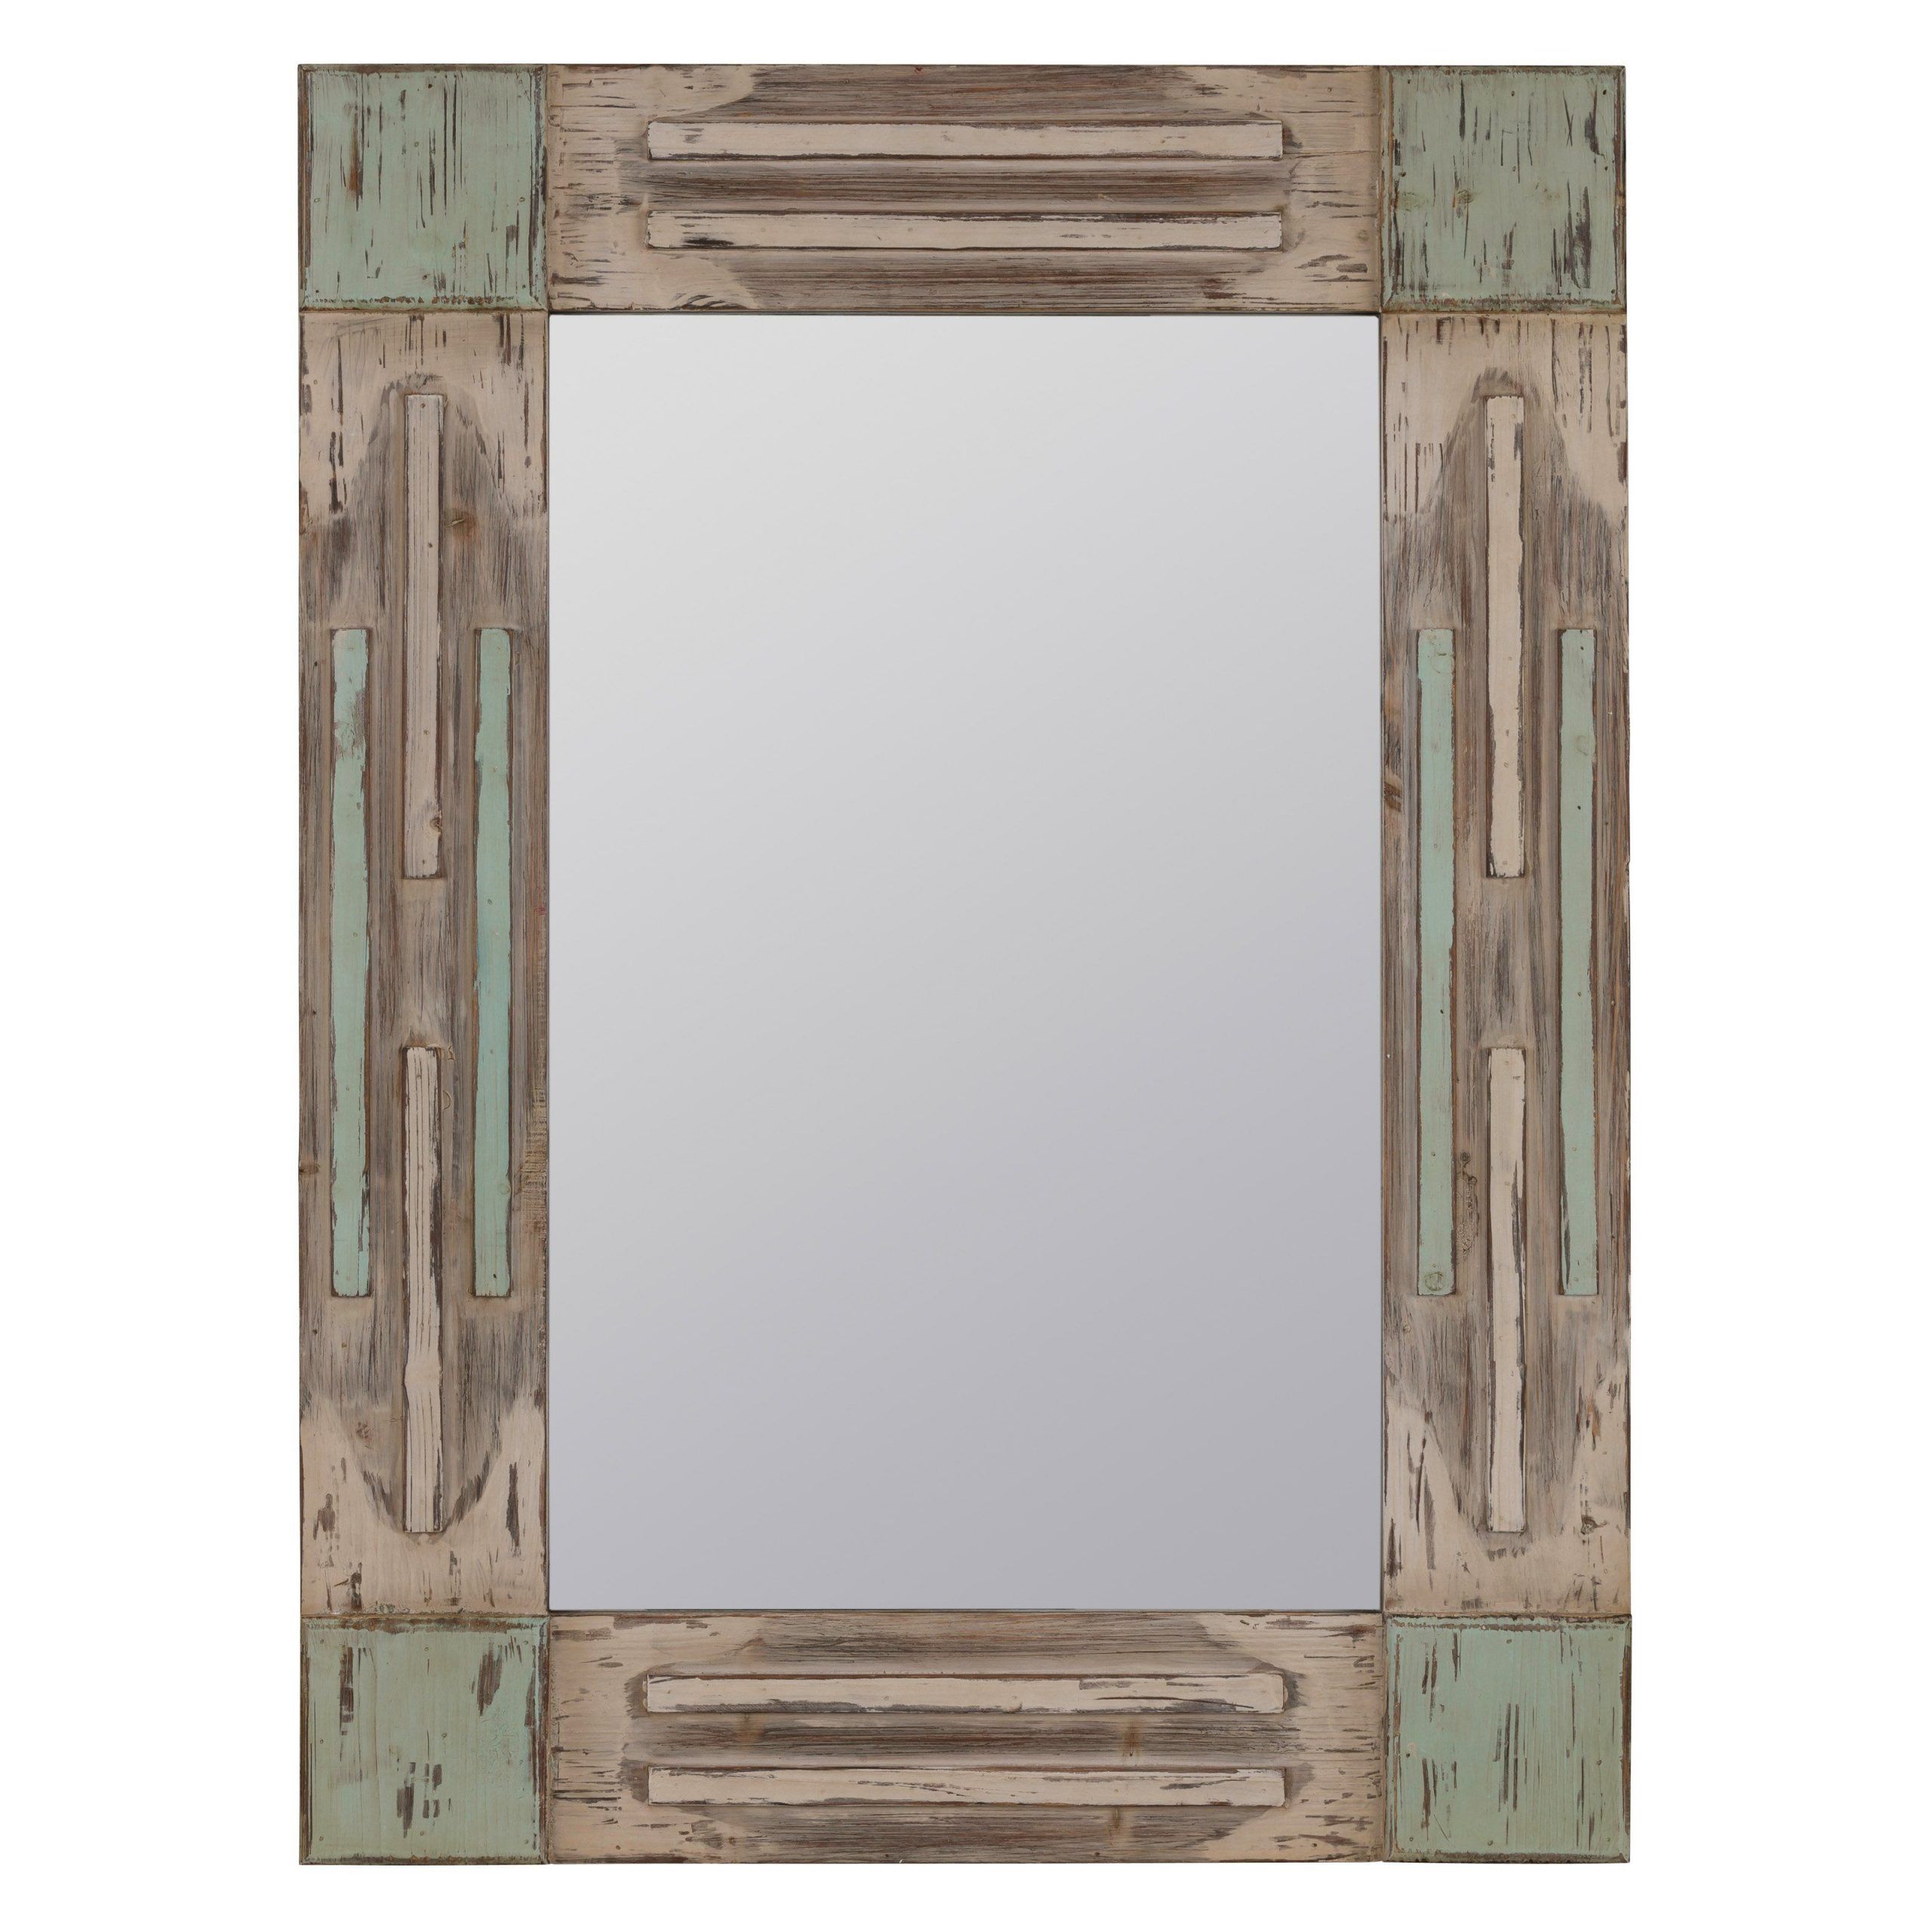 Have To Have It. Cooper Classics Desna Wall Mirror – 31.5w X 42.5h In With Owens Accent Mirrors (Photo 1 of 15)